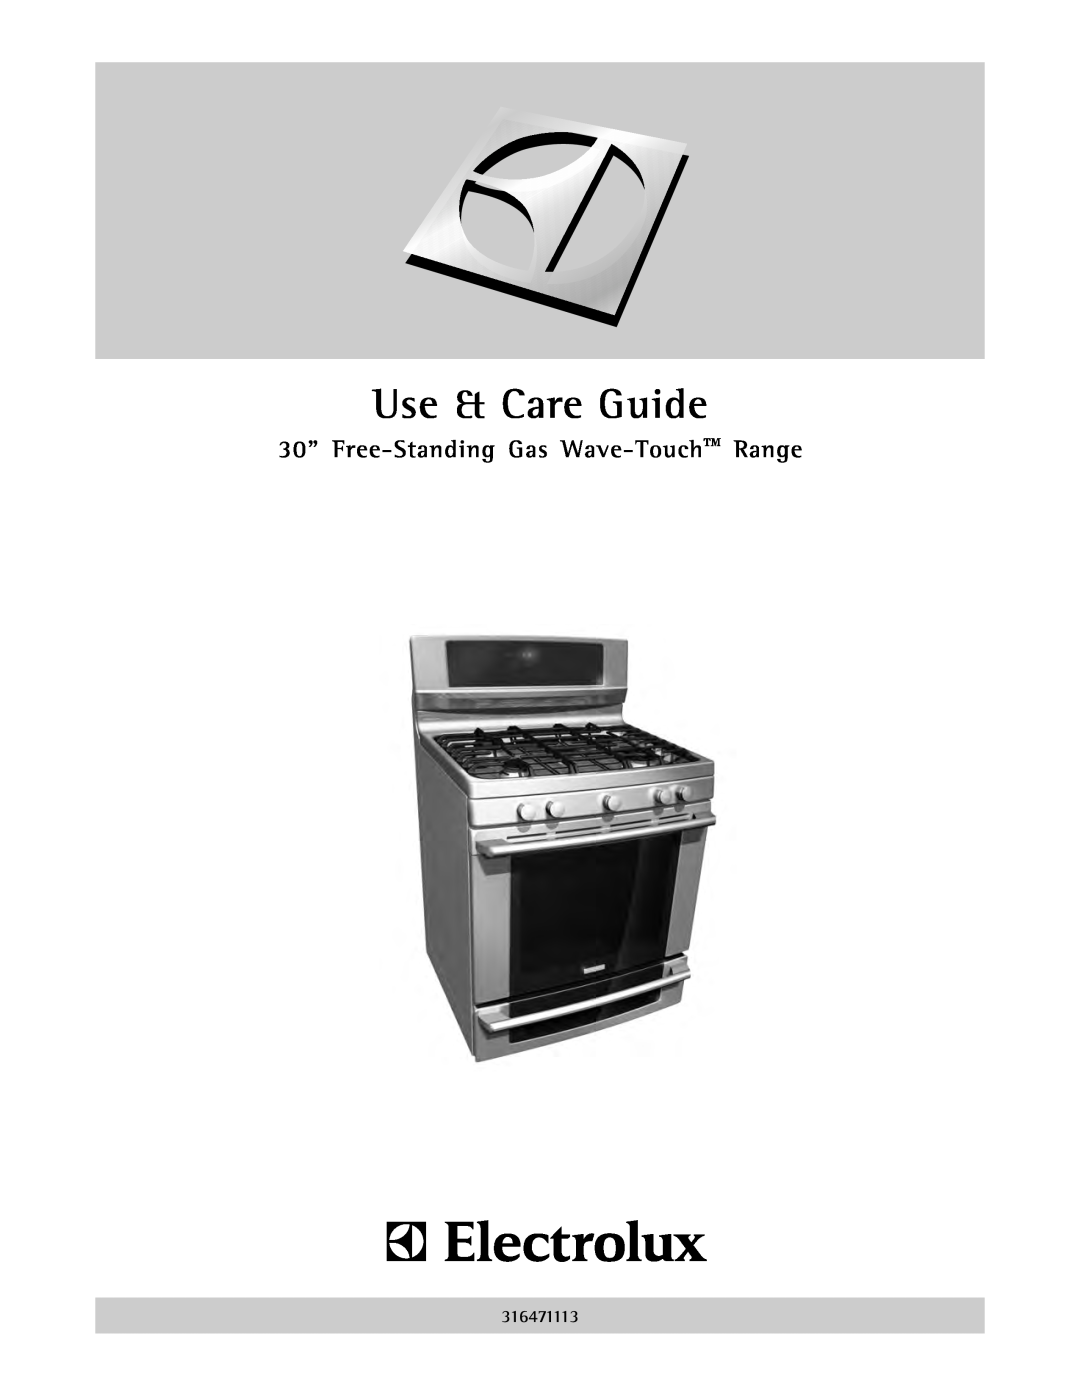 Electrolux 316471113 manual Use & Care Guide, 30” Free-Standing Gas Wave-Touch Range 